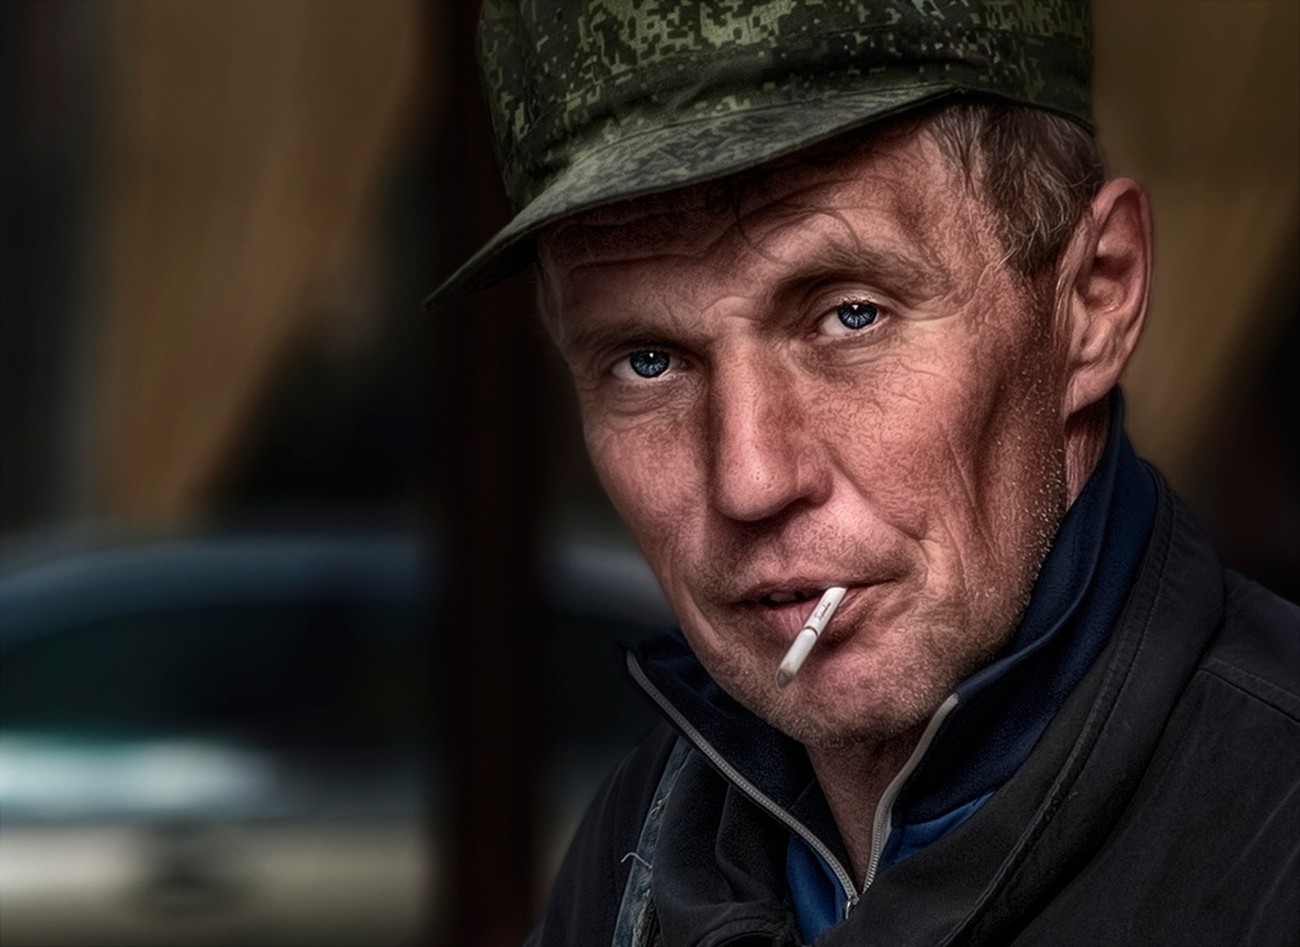 47+ Jaw Dropping Portraits Of Men You Cannot Miss